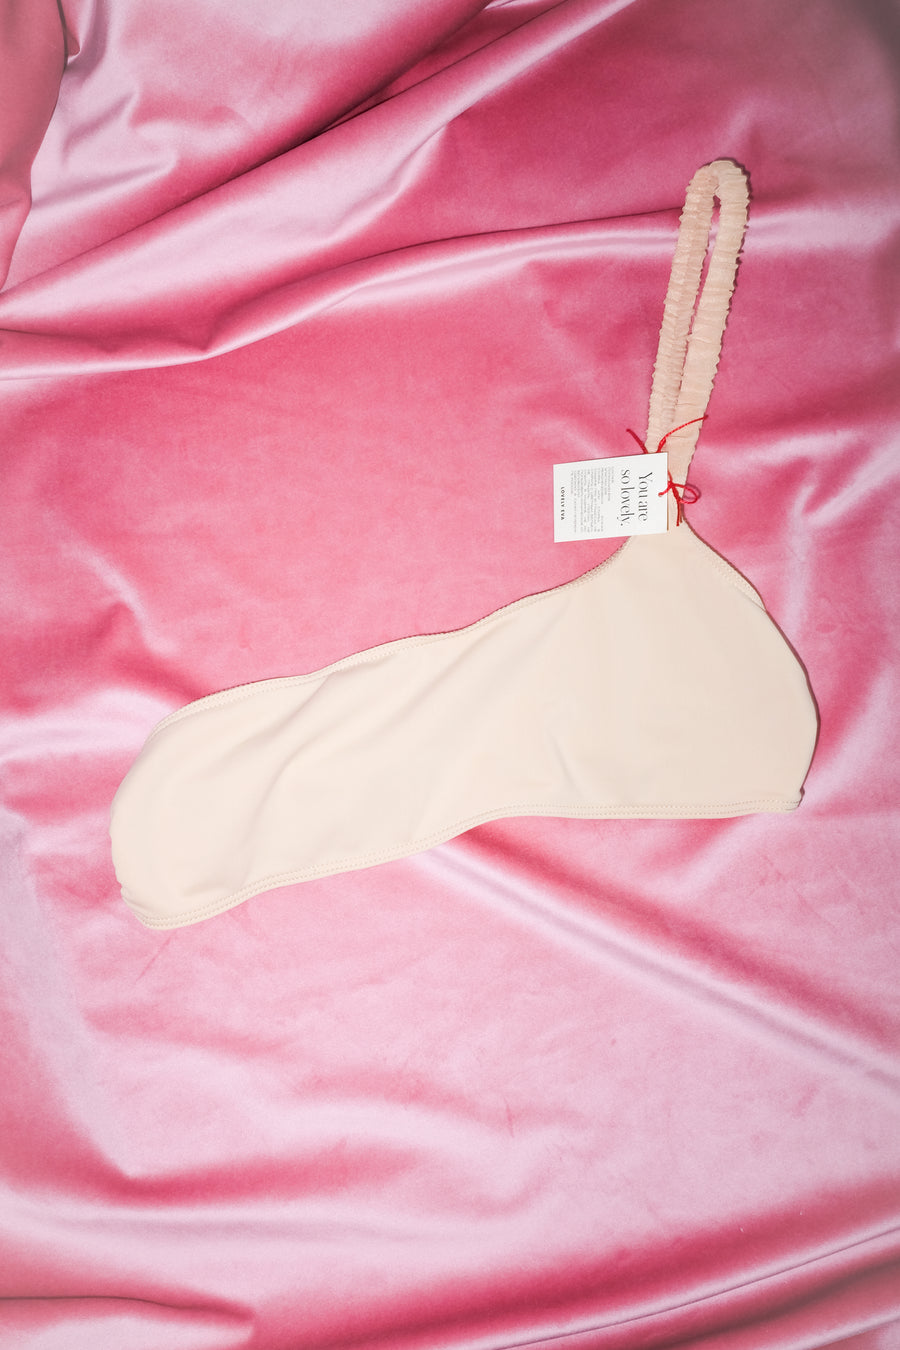 Linen set N3. One strap bra and nude thongs